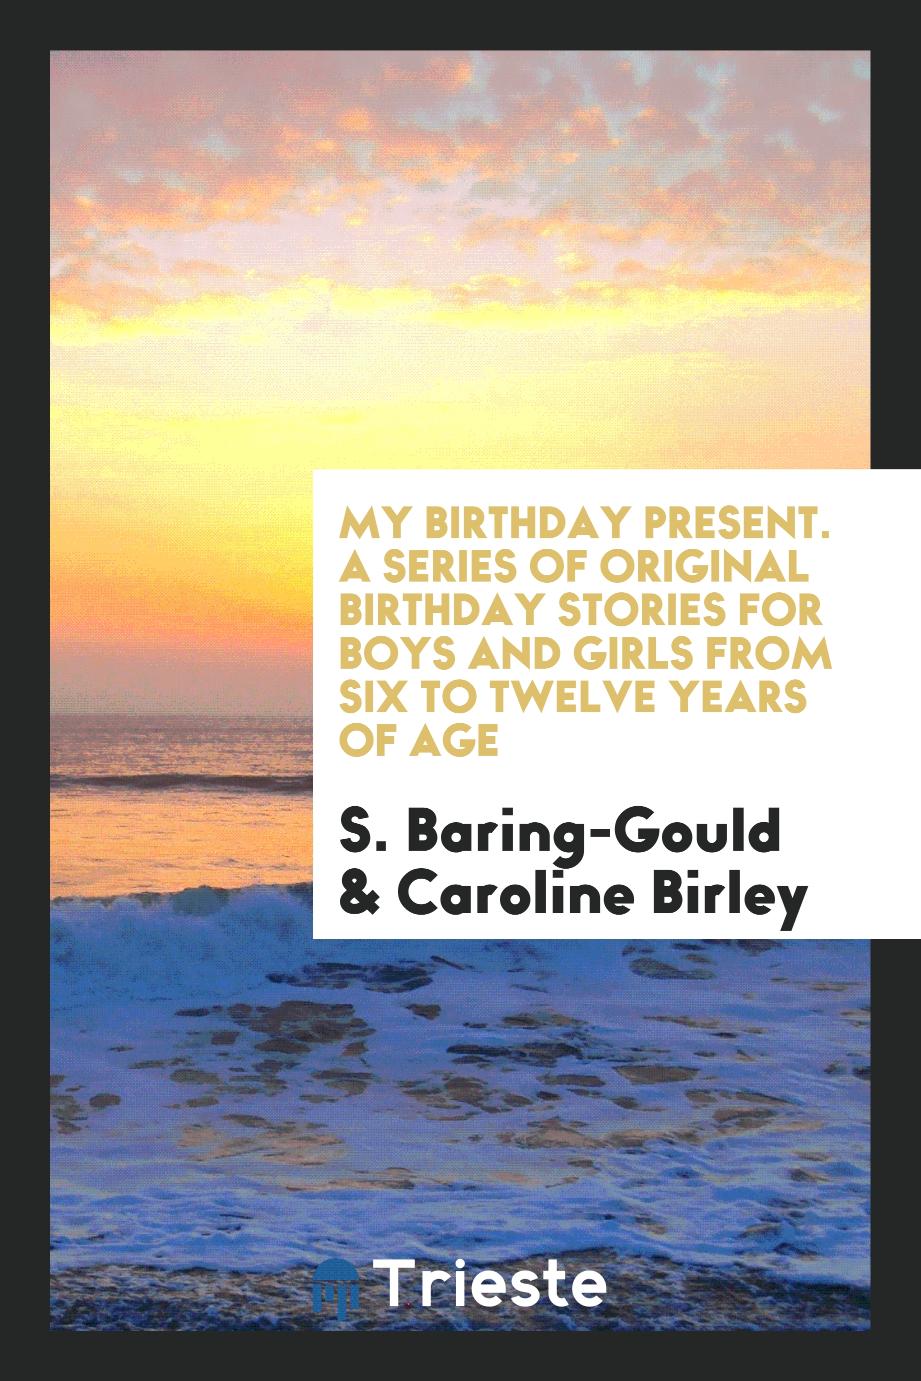 My Birthday Present. A Series of Original Birthday Stories for Boys and Girls from Six to Twelve Years of Age